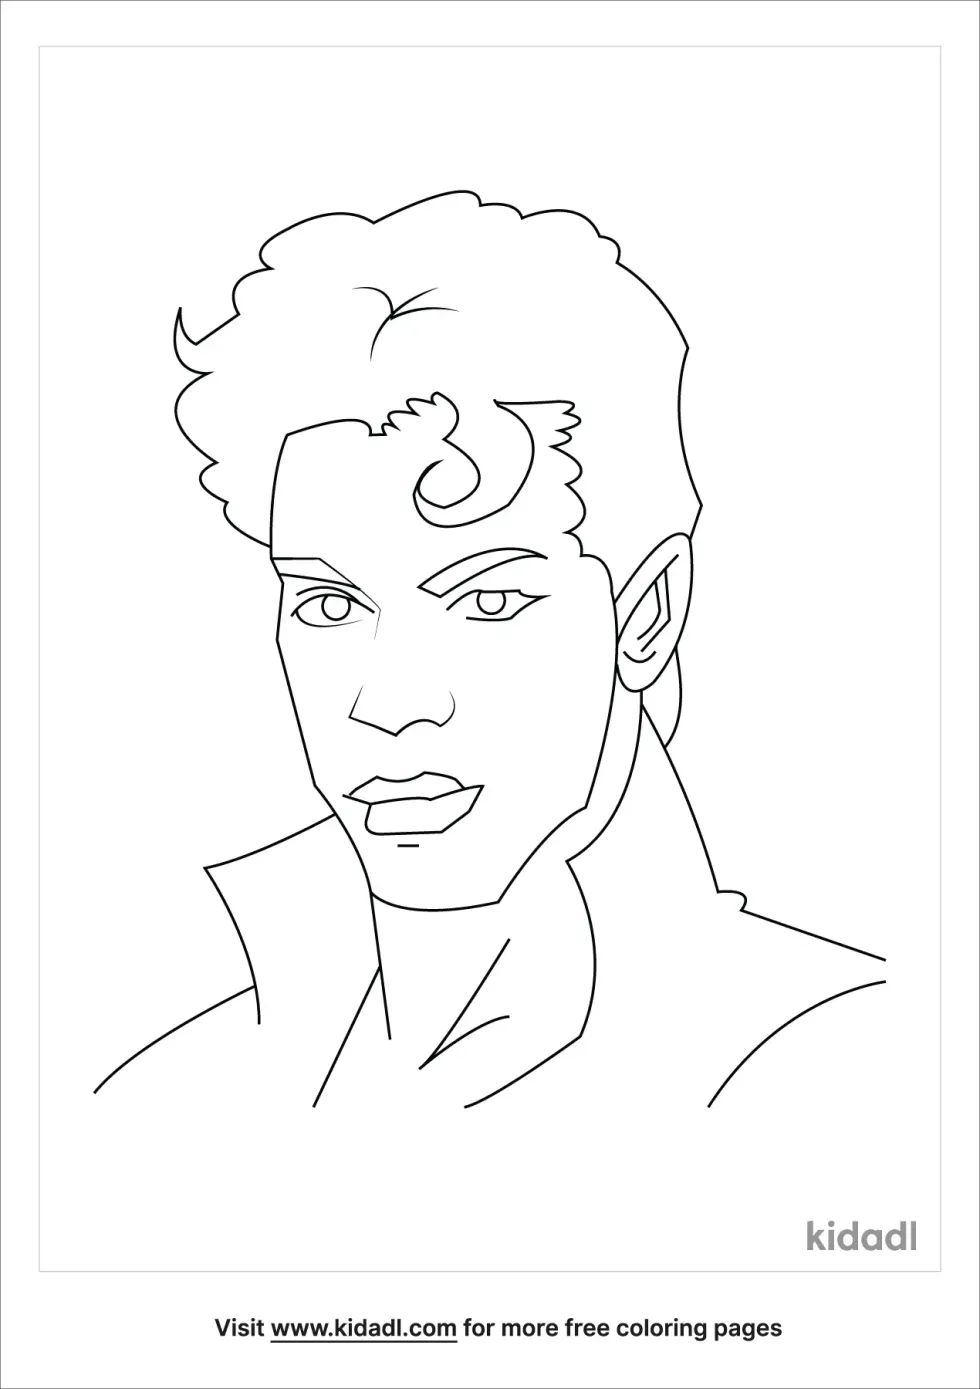 Prince Rogers Nelson Coloring Page